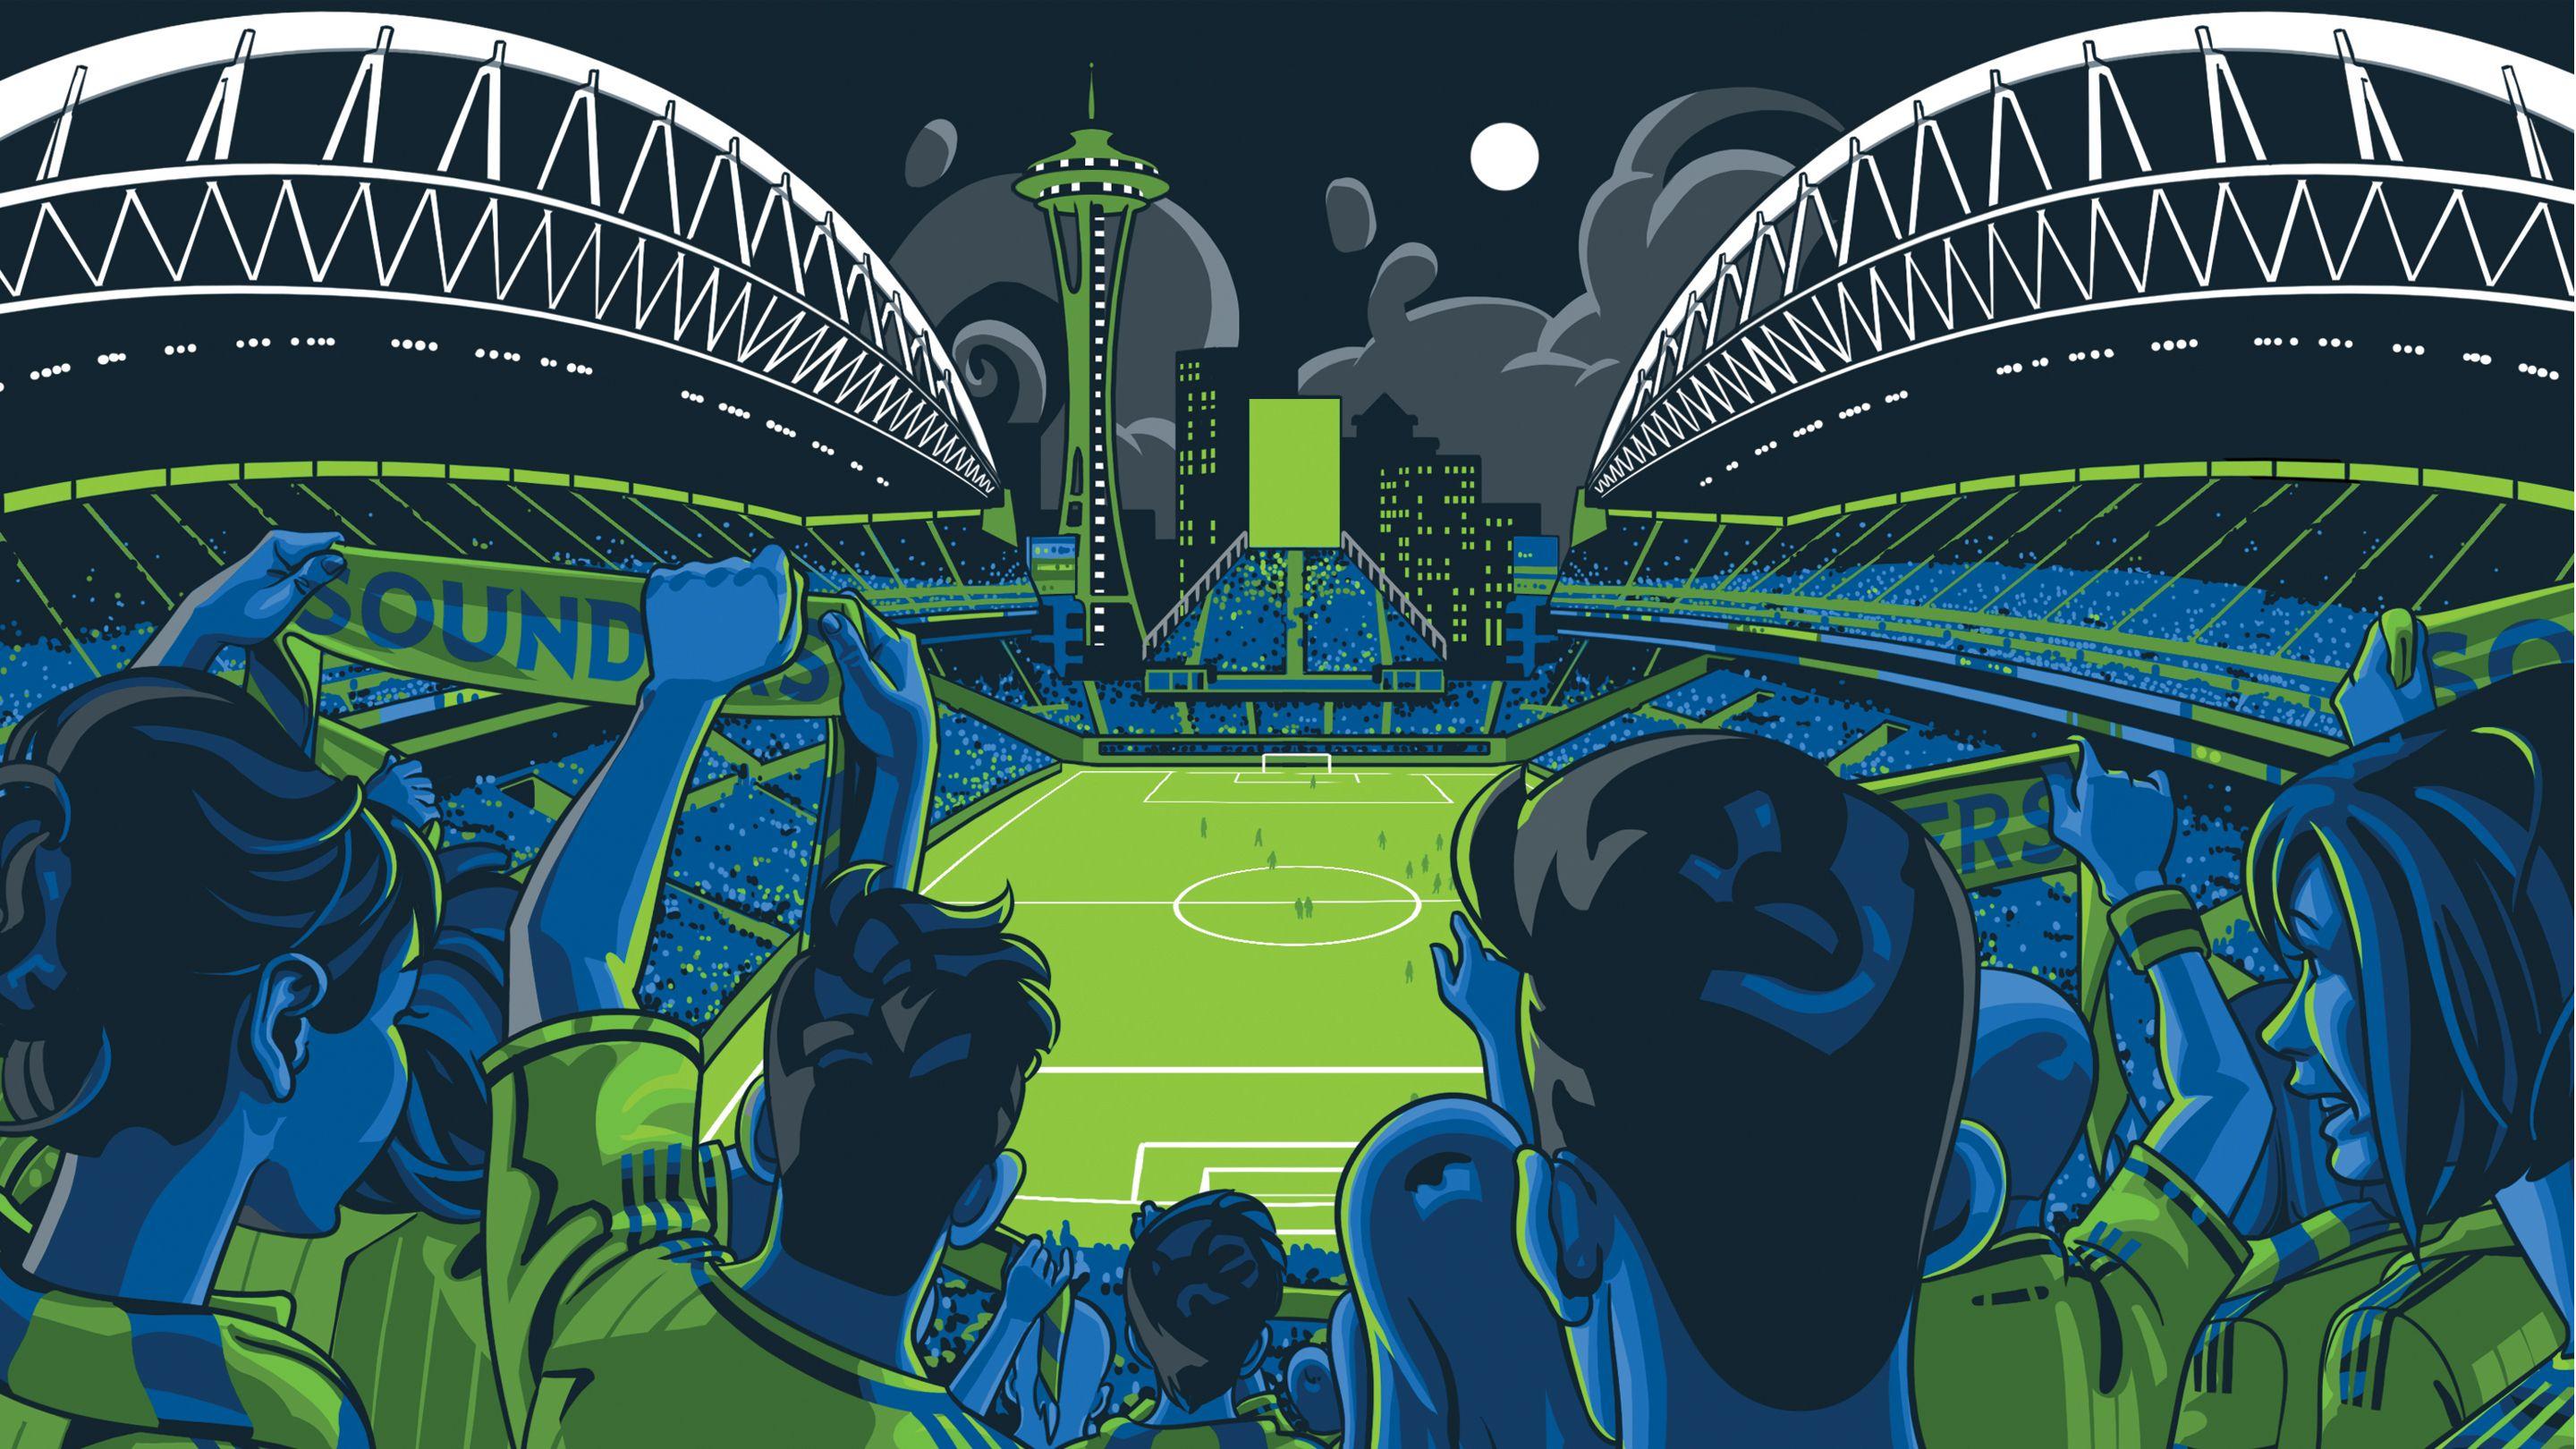 CenturyLink Field comes alive on custom Xbox One console. Seattle